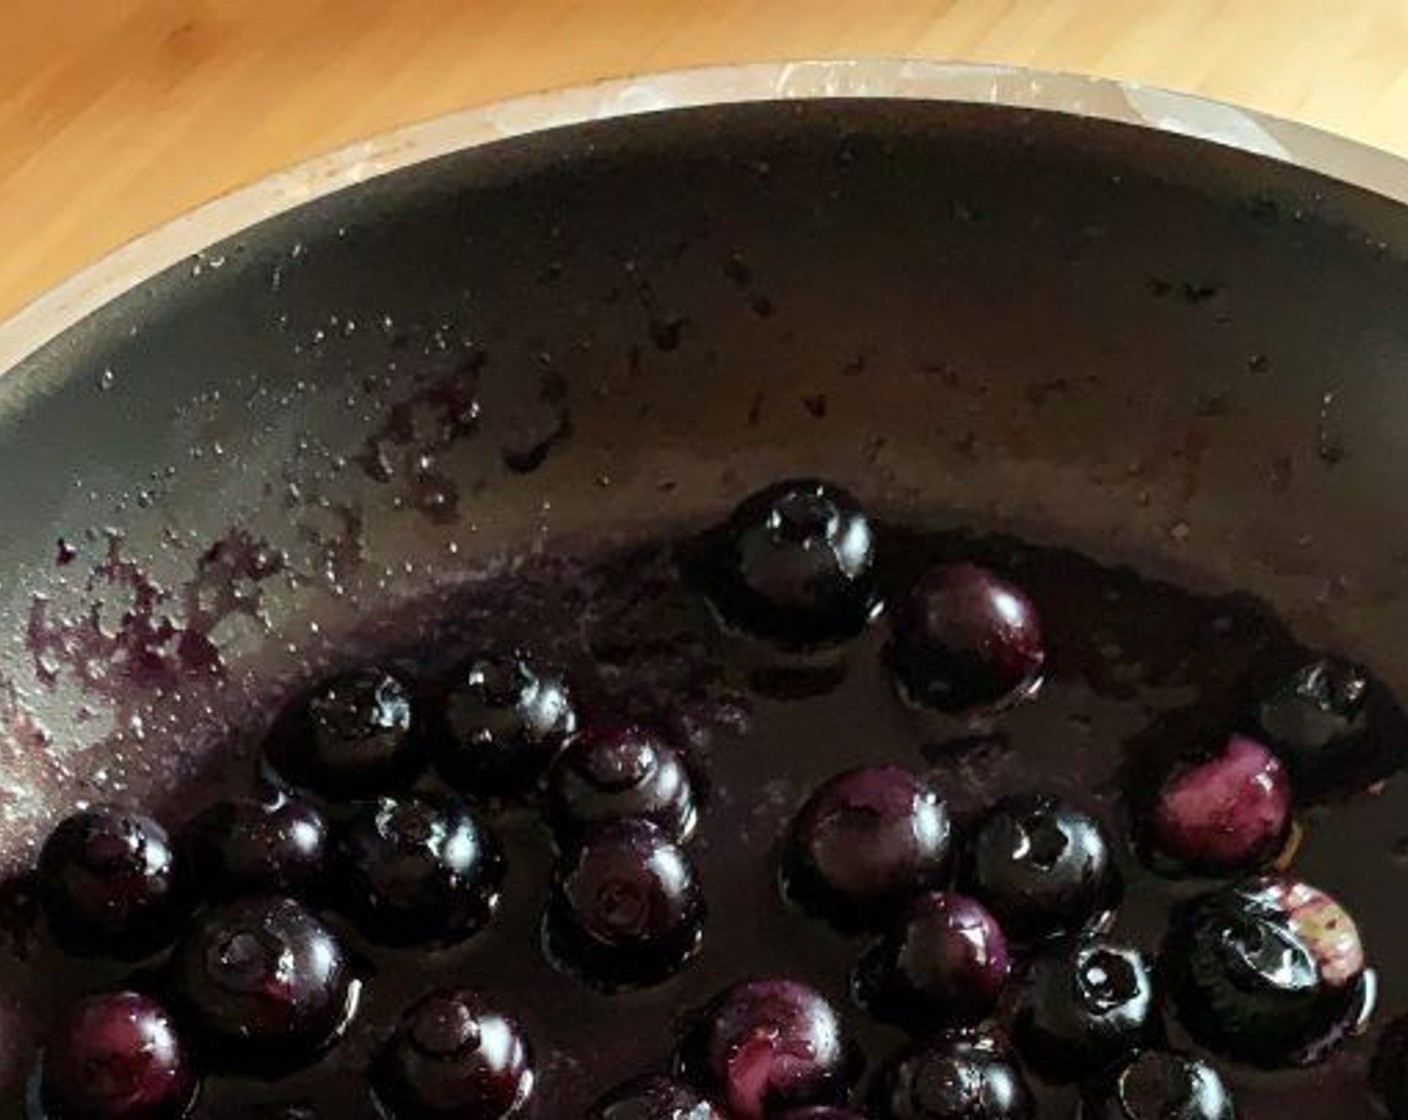 step 7 Meanwhile in a skillet, cook Water (0.5 oz), Granulated Sugar (2 Tbsp), and Fresh Blueberry (1/3 cup) for 3-5 minutes. Set aside and let them cool down.